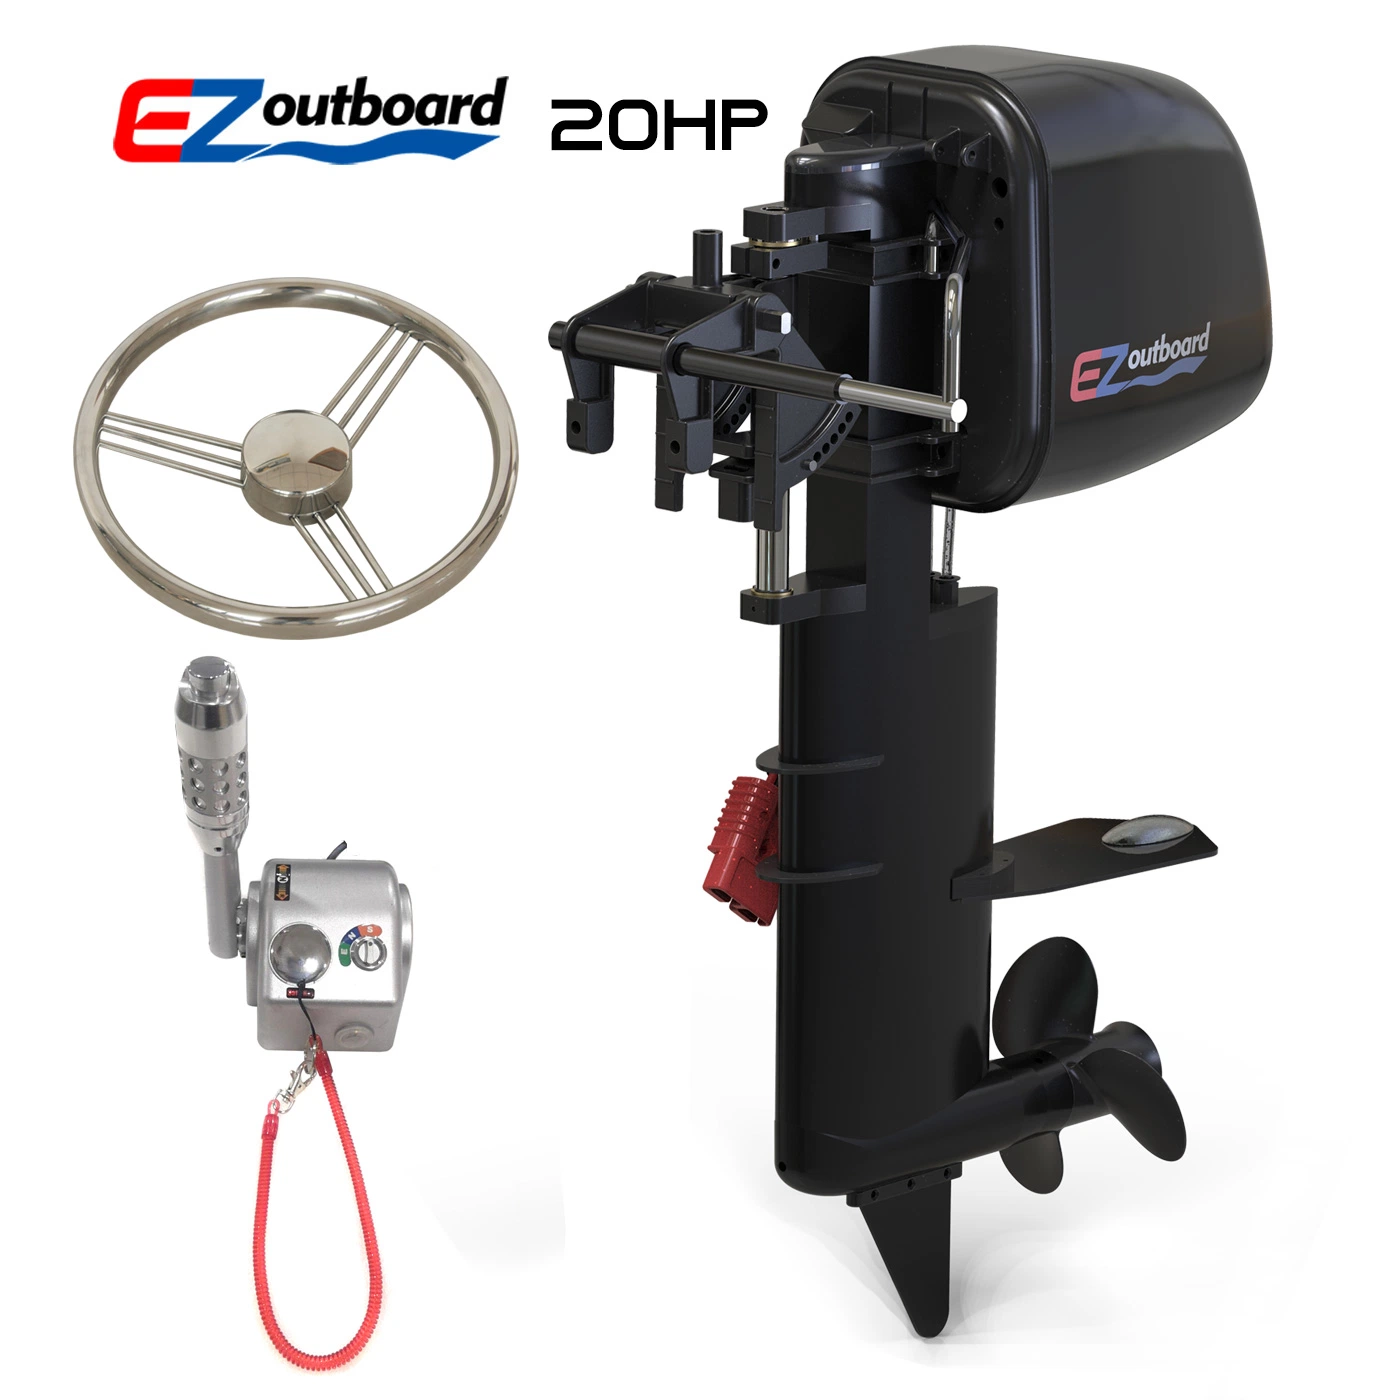 48V 2800RPM Gear-less, Brushless, Shaft-less design  New EZ Outboard sport version 6HP 10HP 20HP Electric Propulsion Outboard Motor for Boat and ship